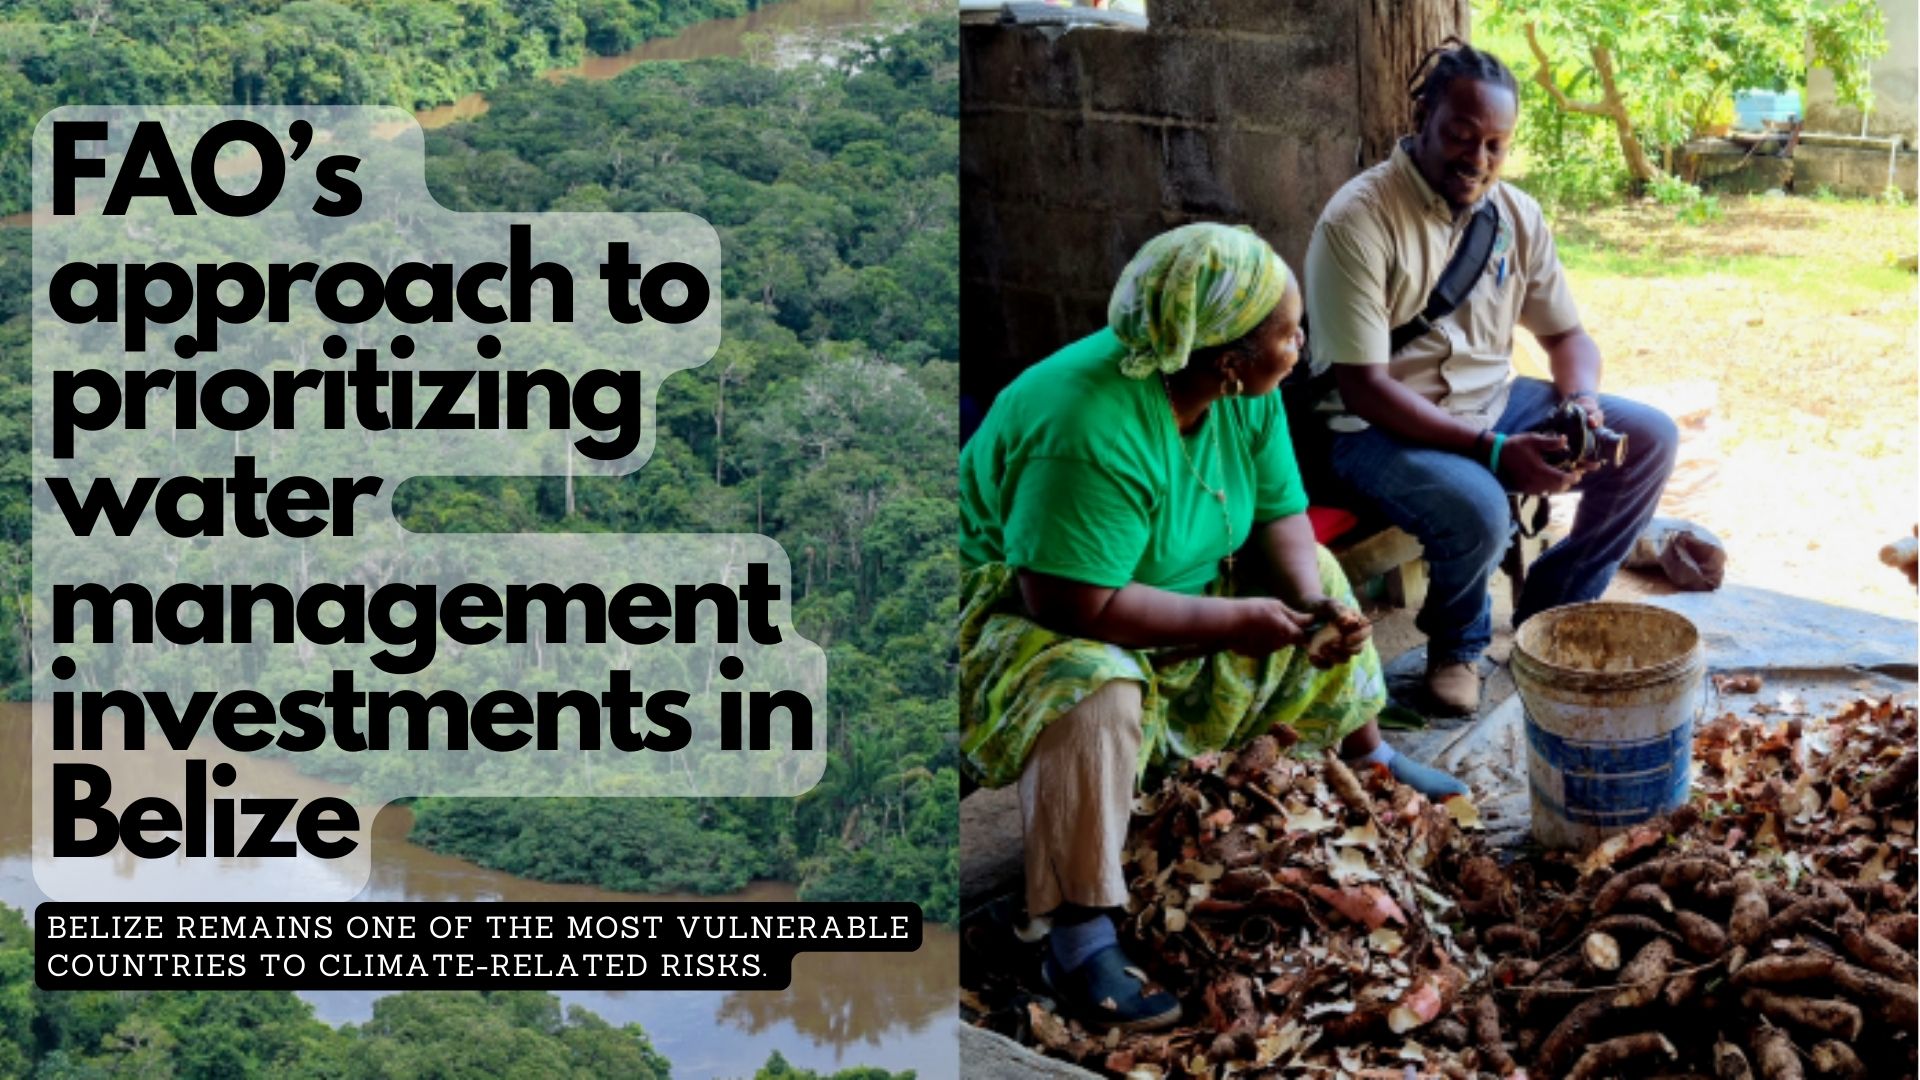 FAO’s launches innovative approach to prioritizing water management investments in Belize